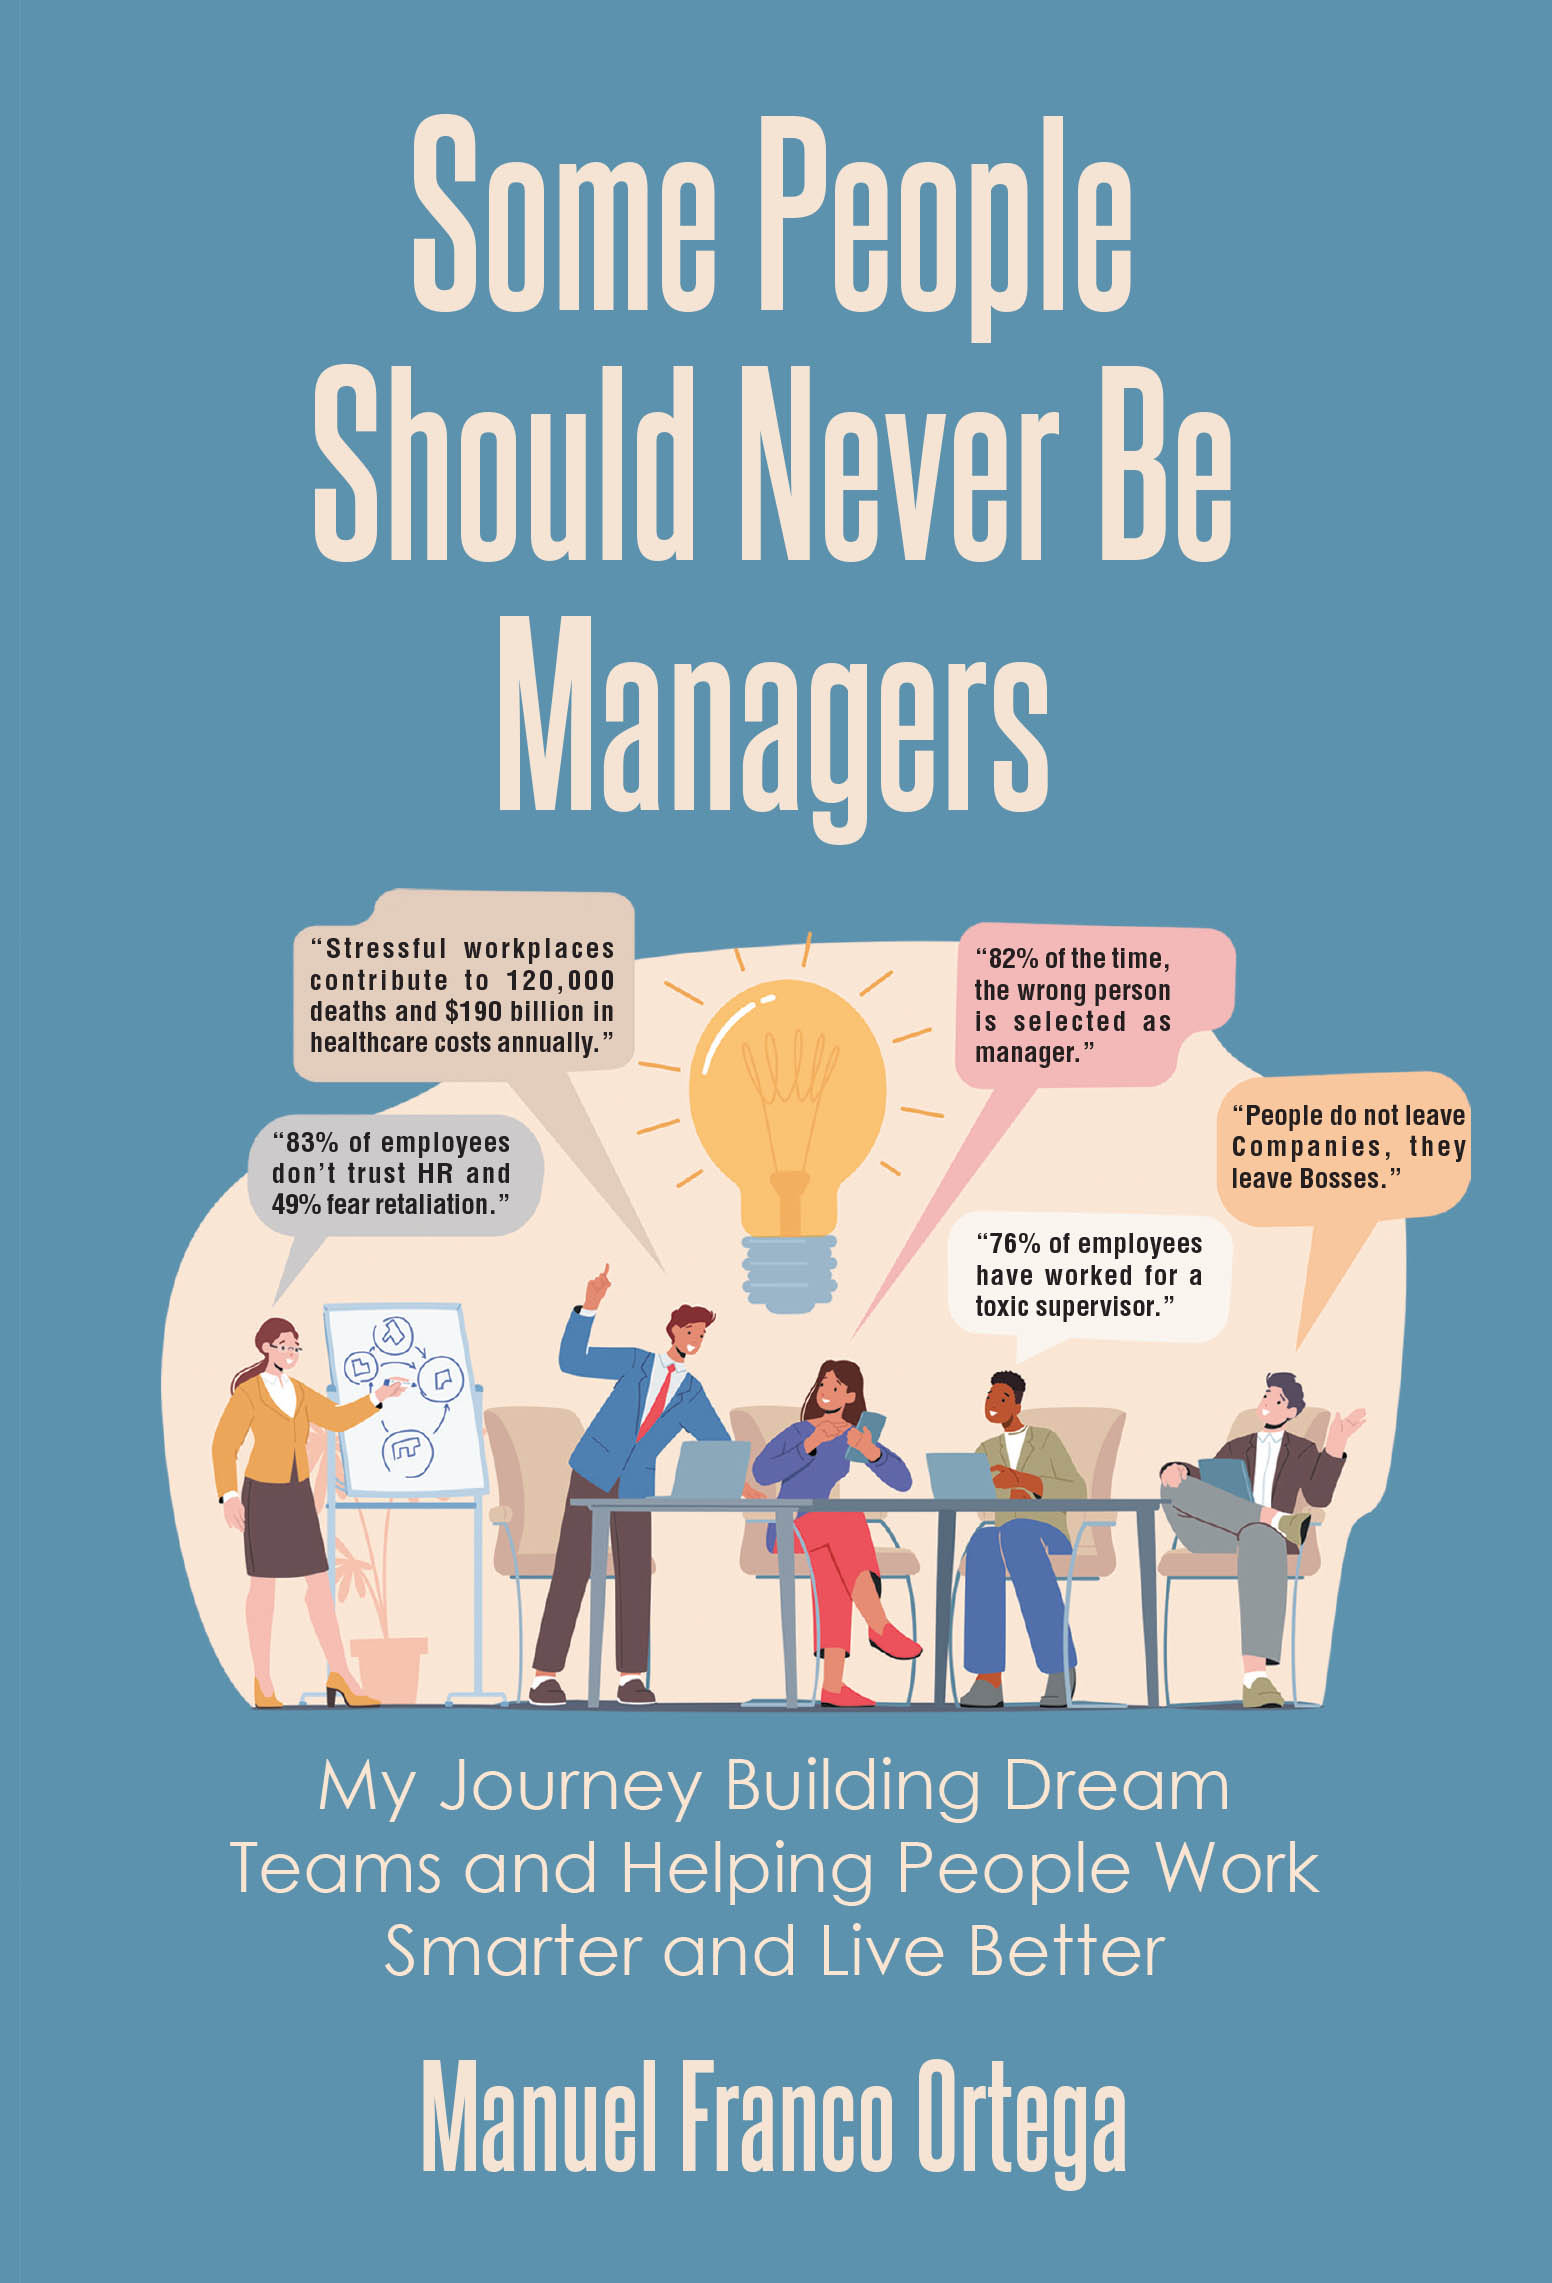 Author Manuel Franco Ortega’s New Book, “Some People Should Never Be Managers,” Draws Upon the Author’s Experiences to Reveal Poor Leadership’s Impact in the Workplace